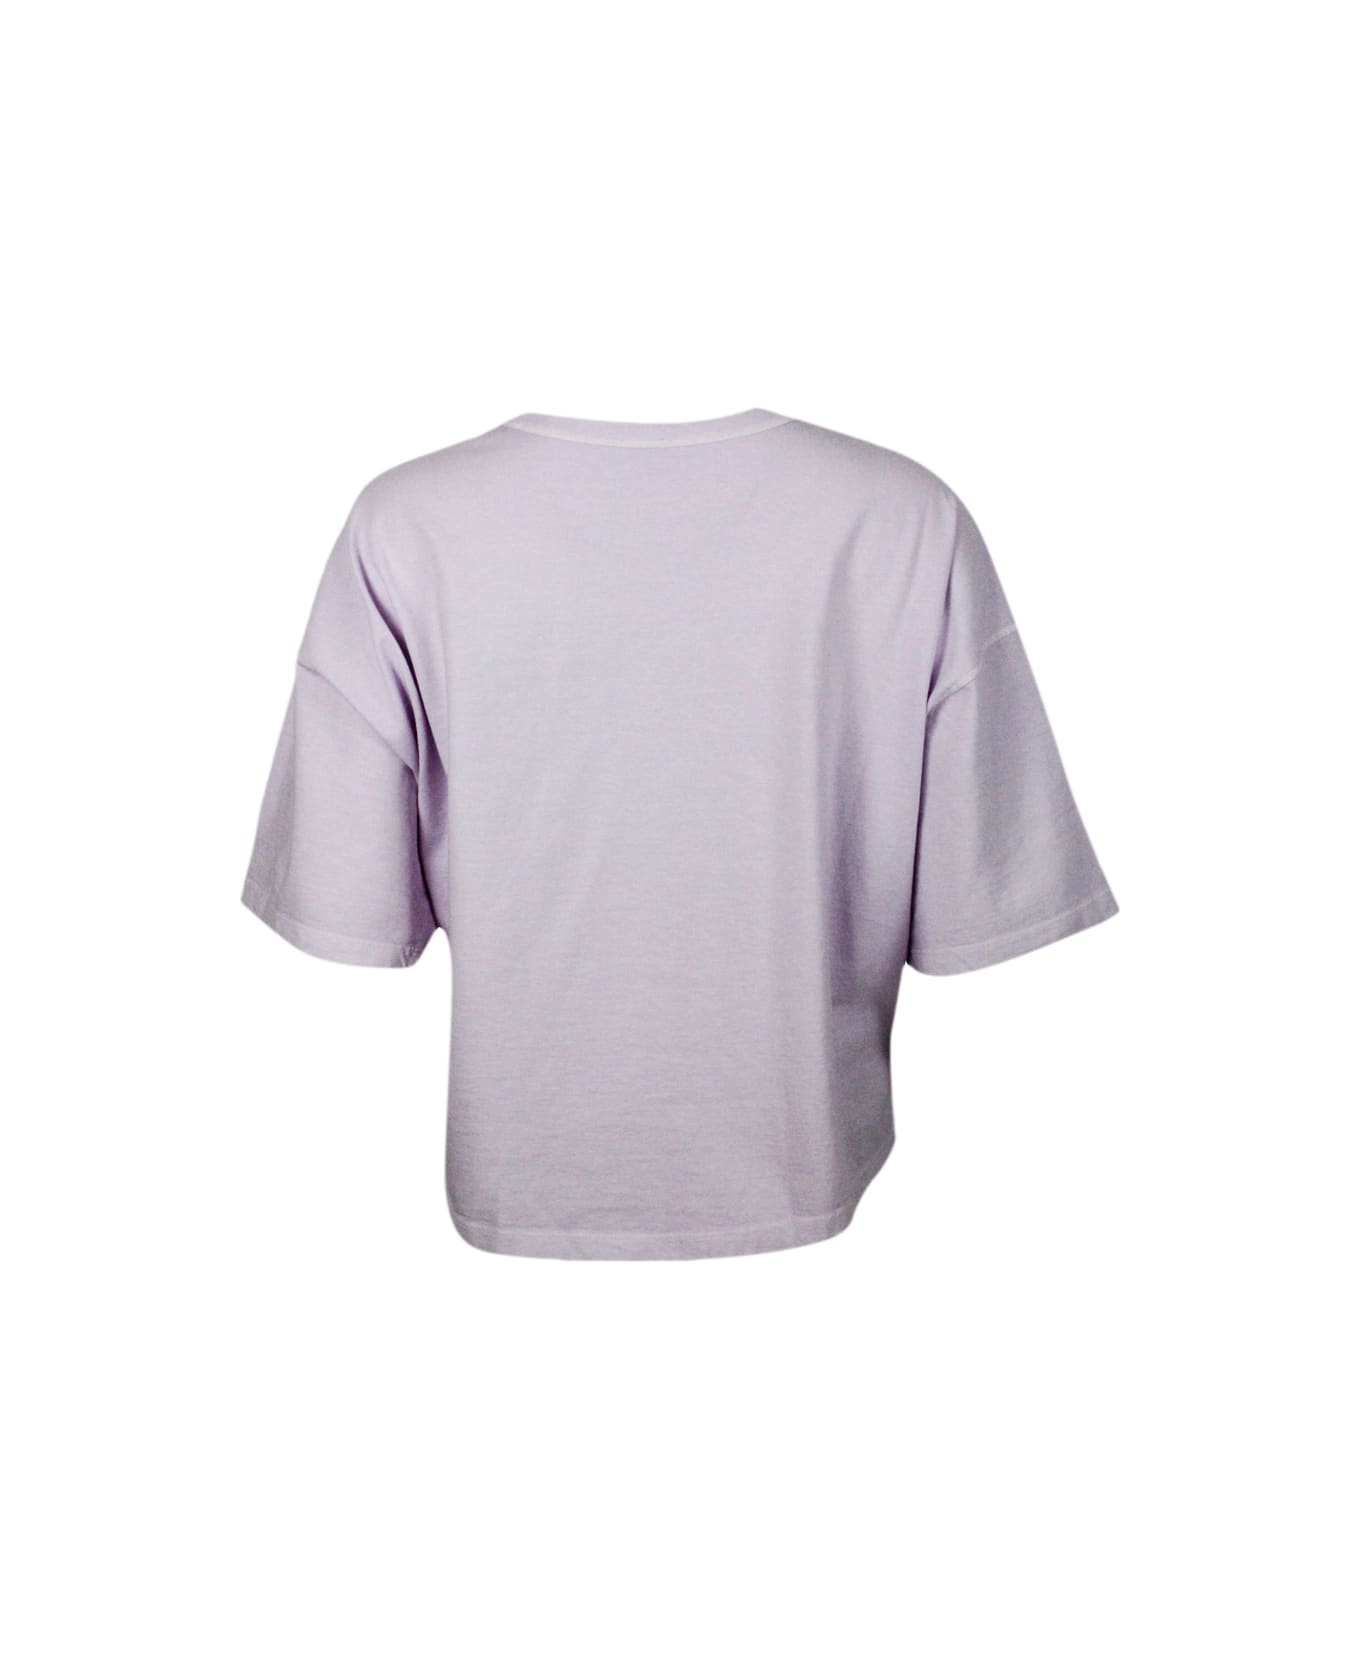 Malo Crew-neck, Short-sleeved T-shirt In 100% Soft Cotton, With An Oversized Fit And Vents On The Sides - Blu wisteria